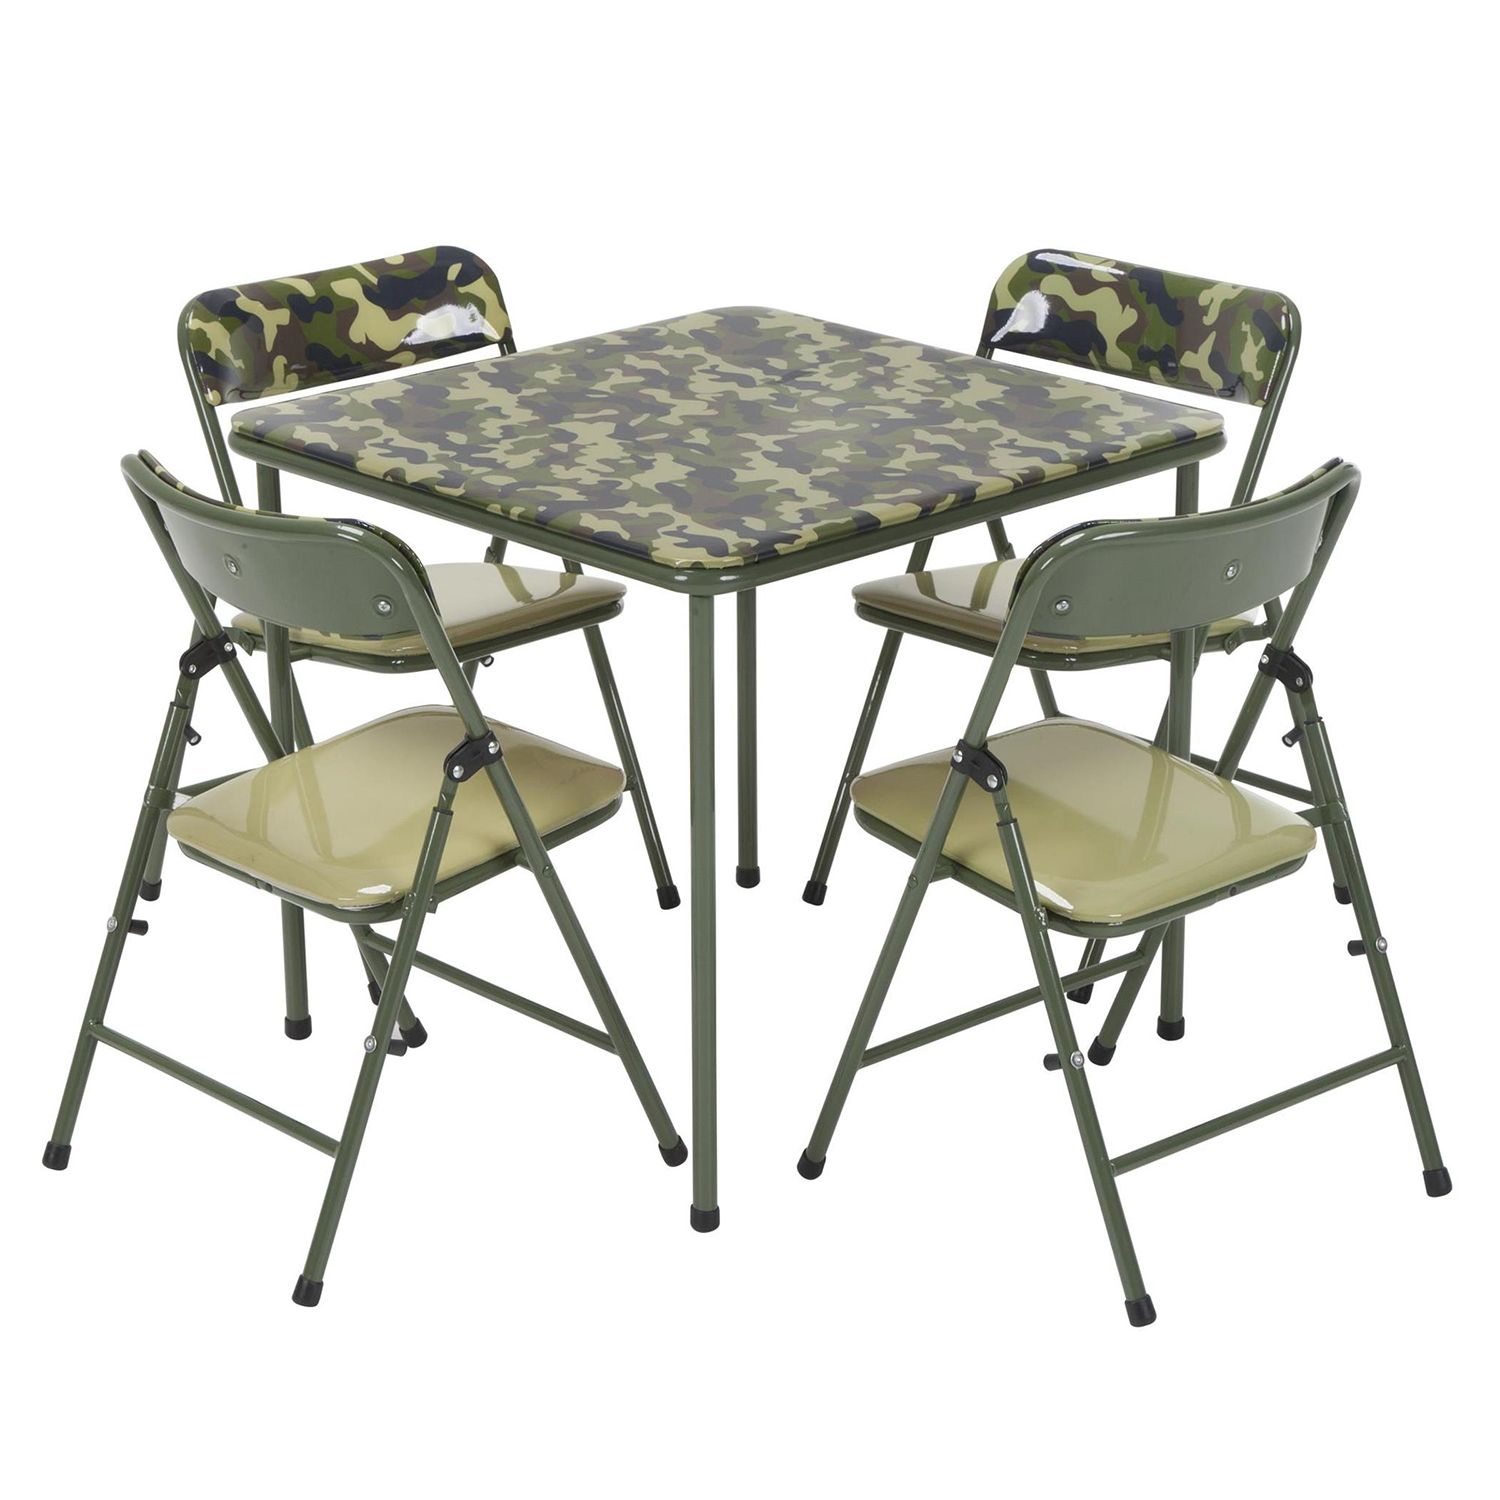 folding table and chair set for toddlers